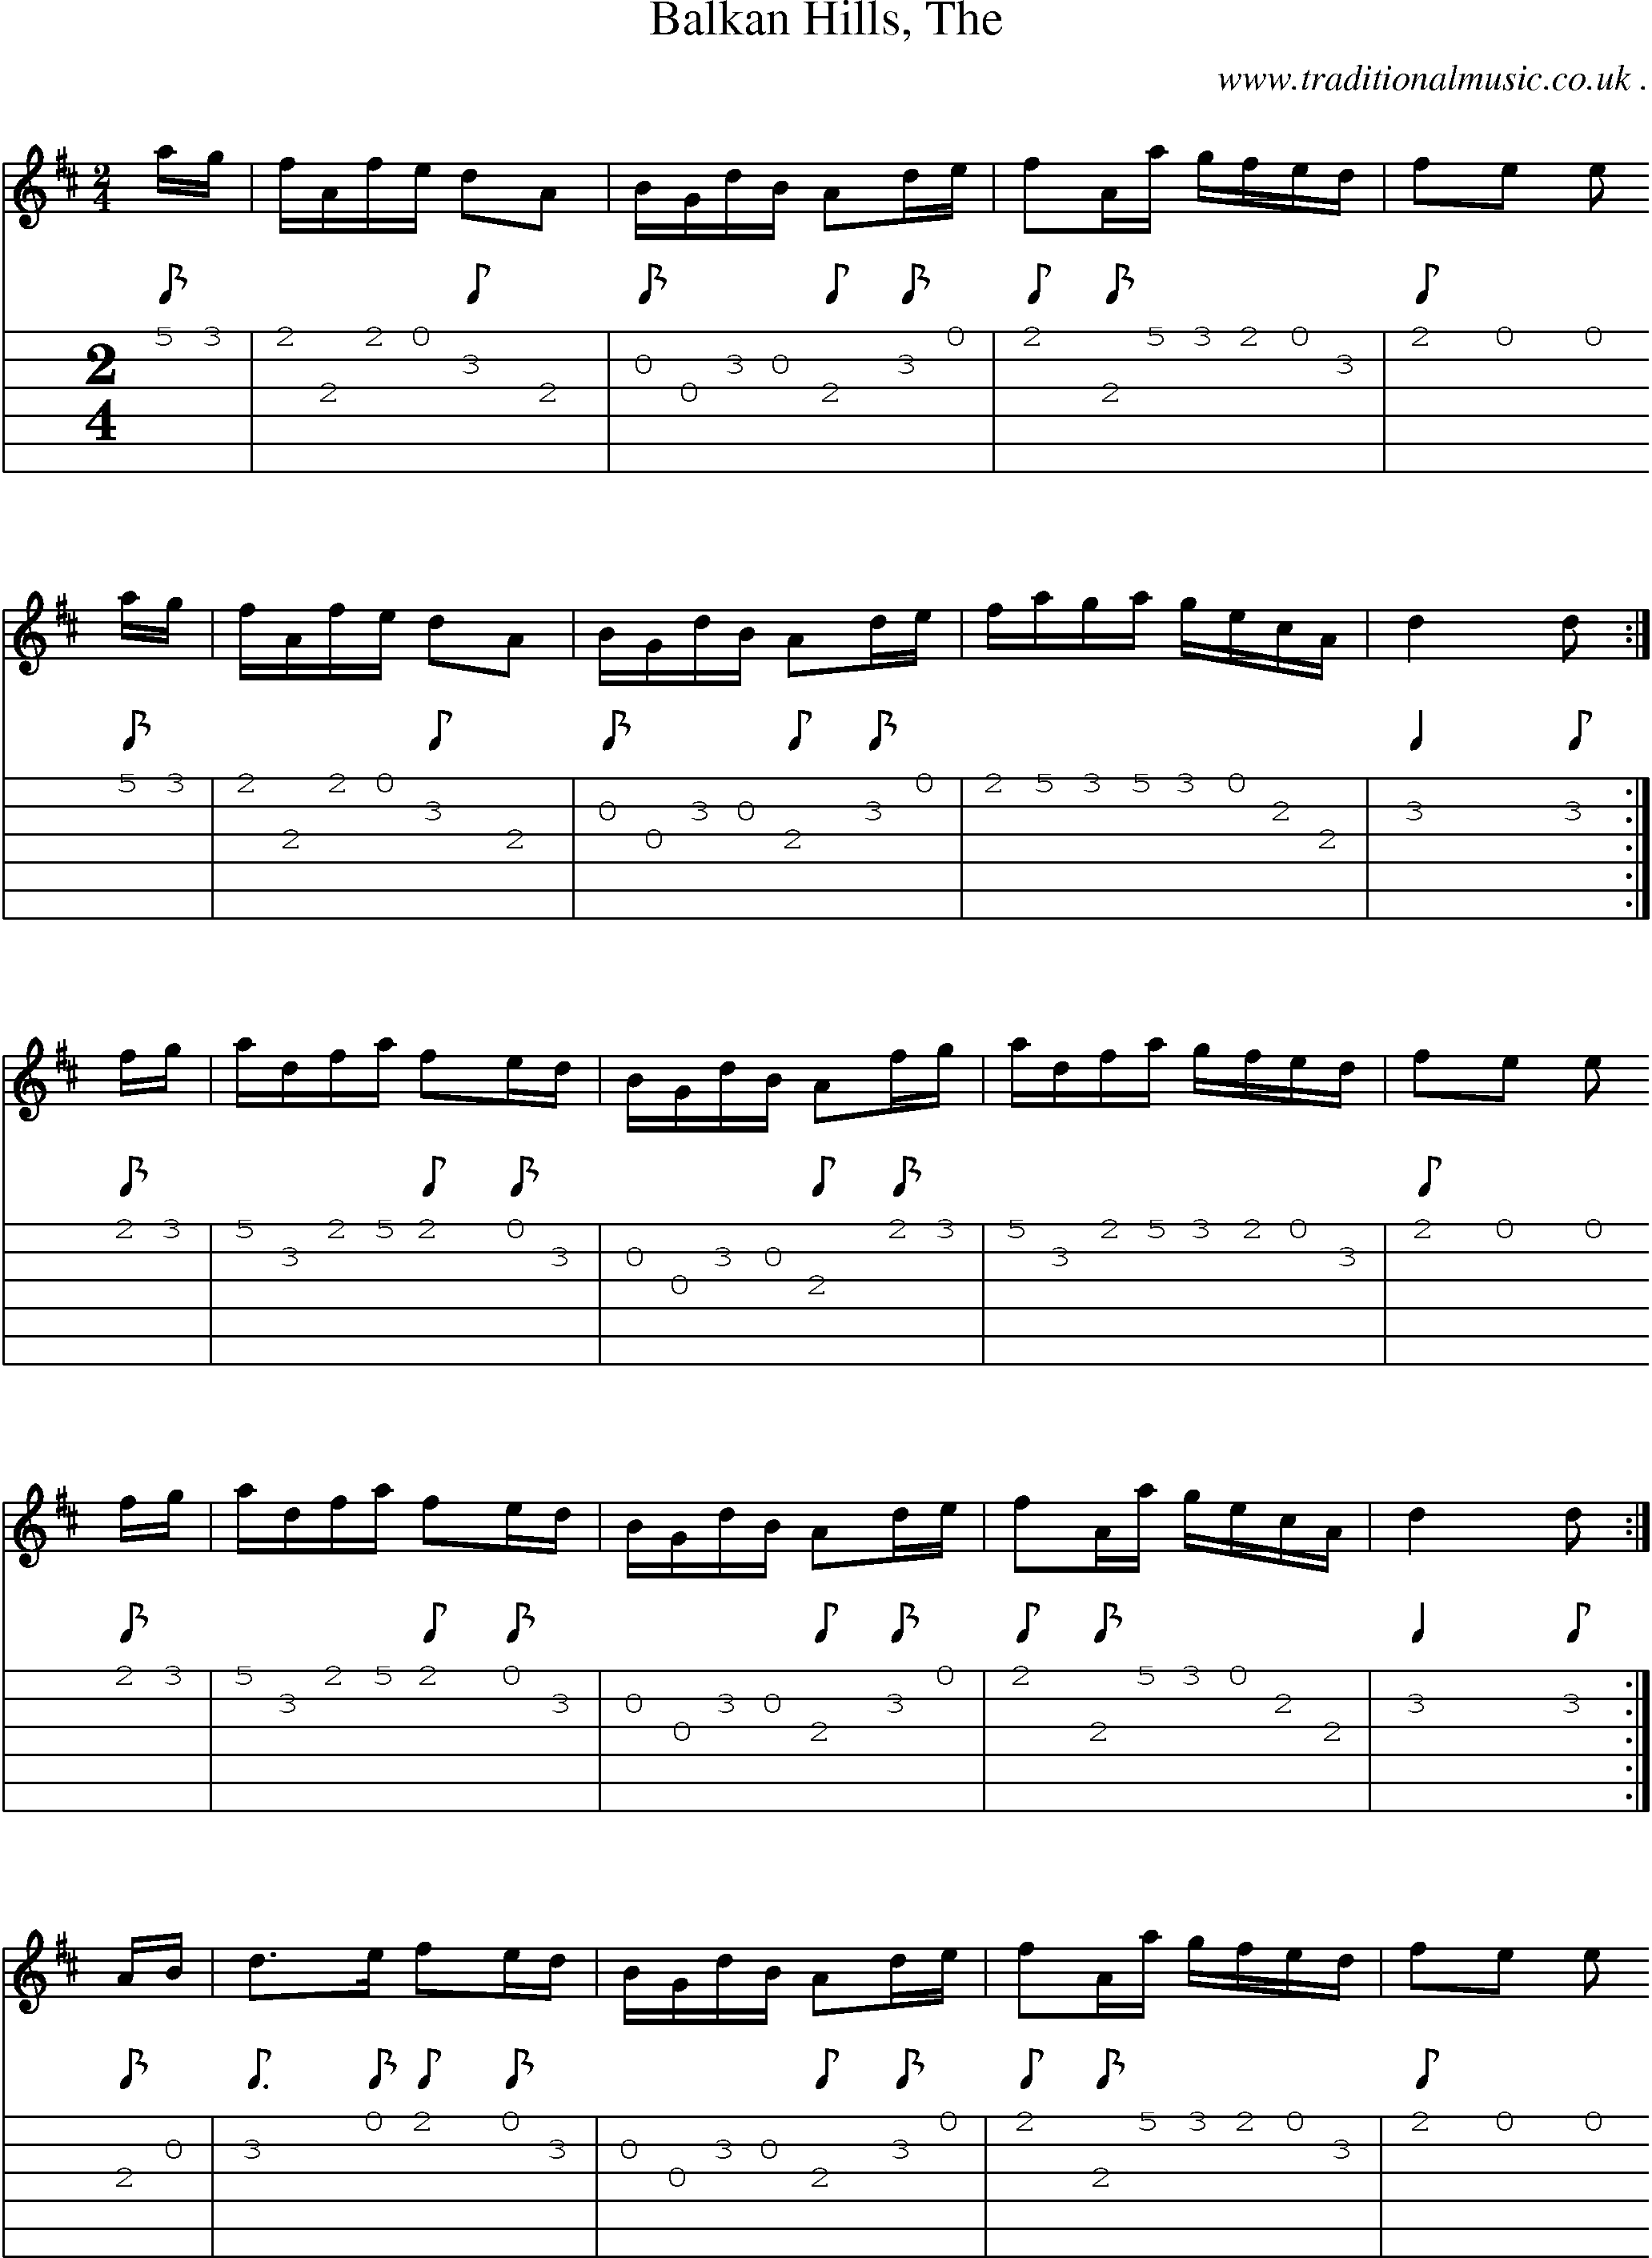 Sheet-music  score, Chords and Guitar Tabs for Balkan Hills The